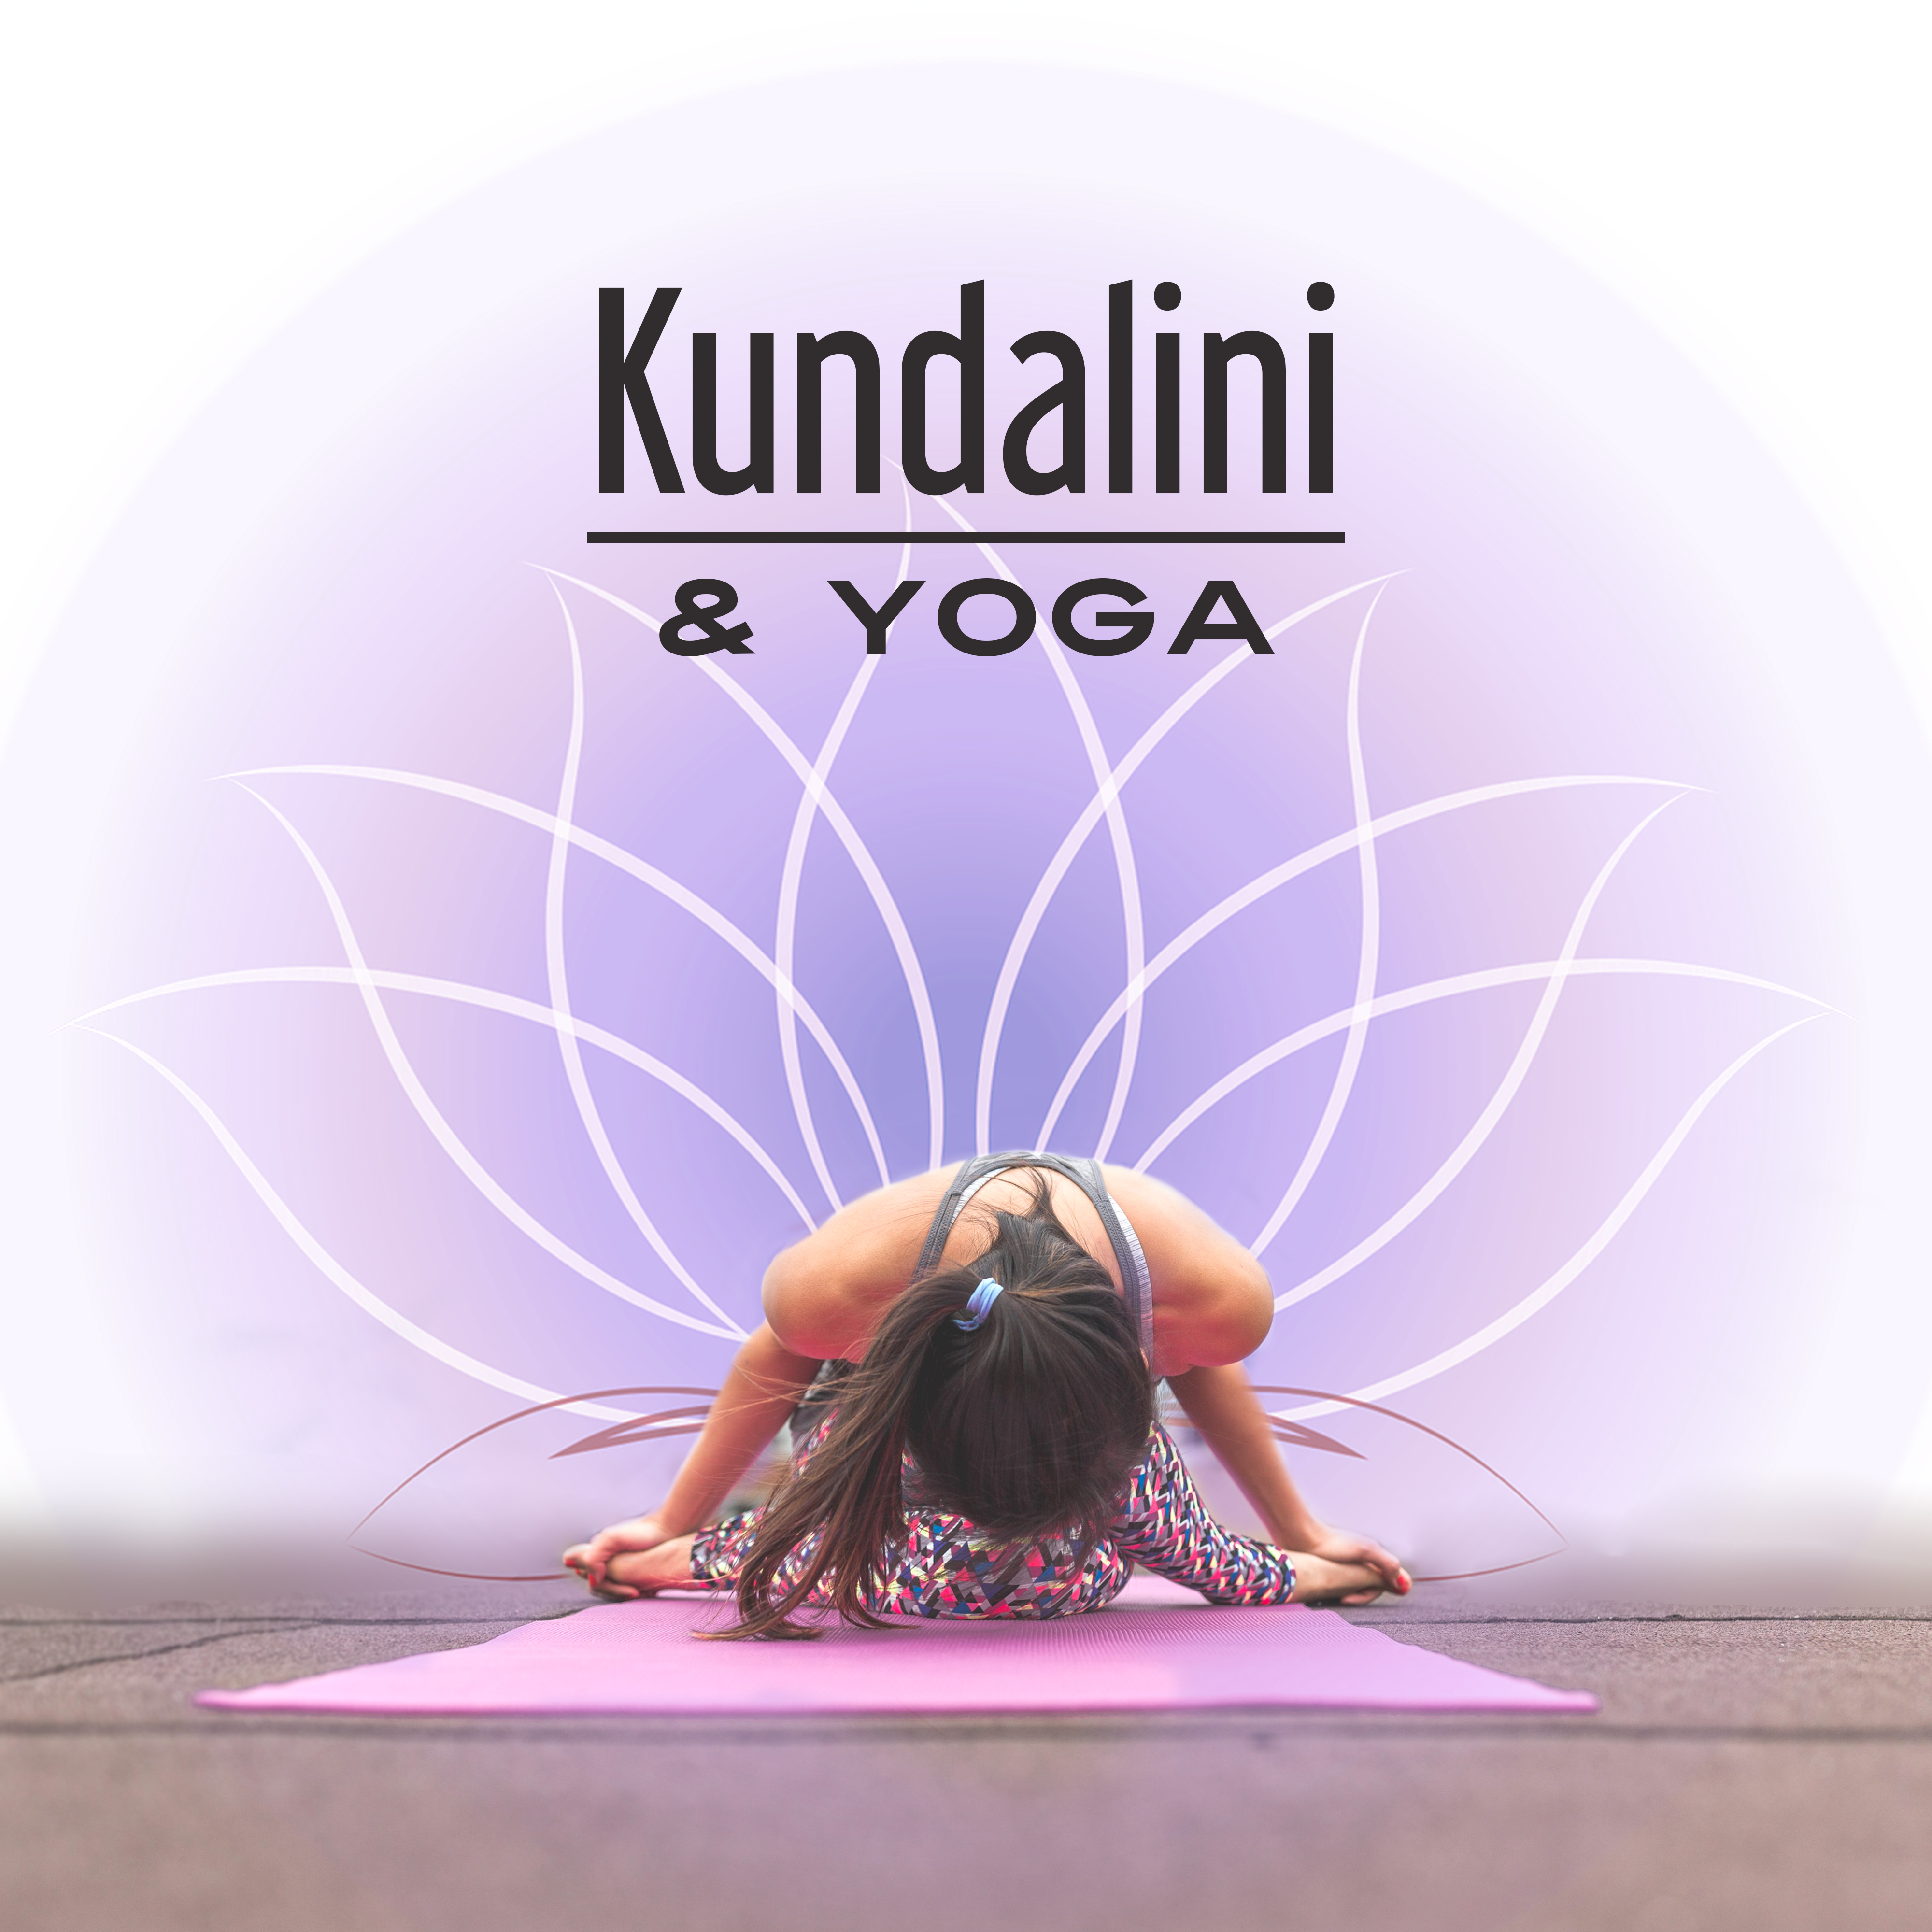 Kundalini  Yoga  Zen Music for Relaxation, Nature Sounds, Deep Meditation, Sounds of Yoga, Contemplation of Nature, Tranquility  Harmony